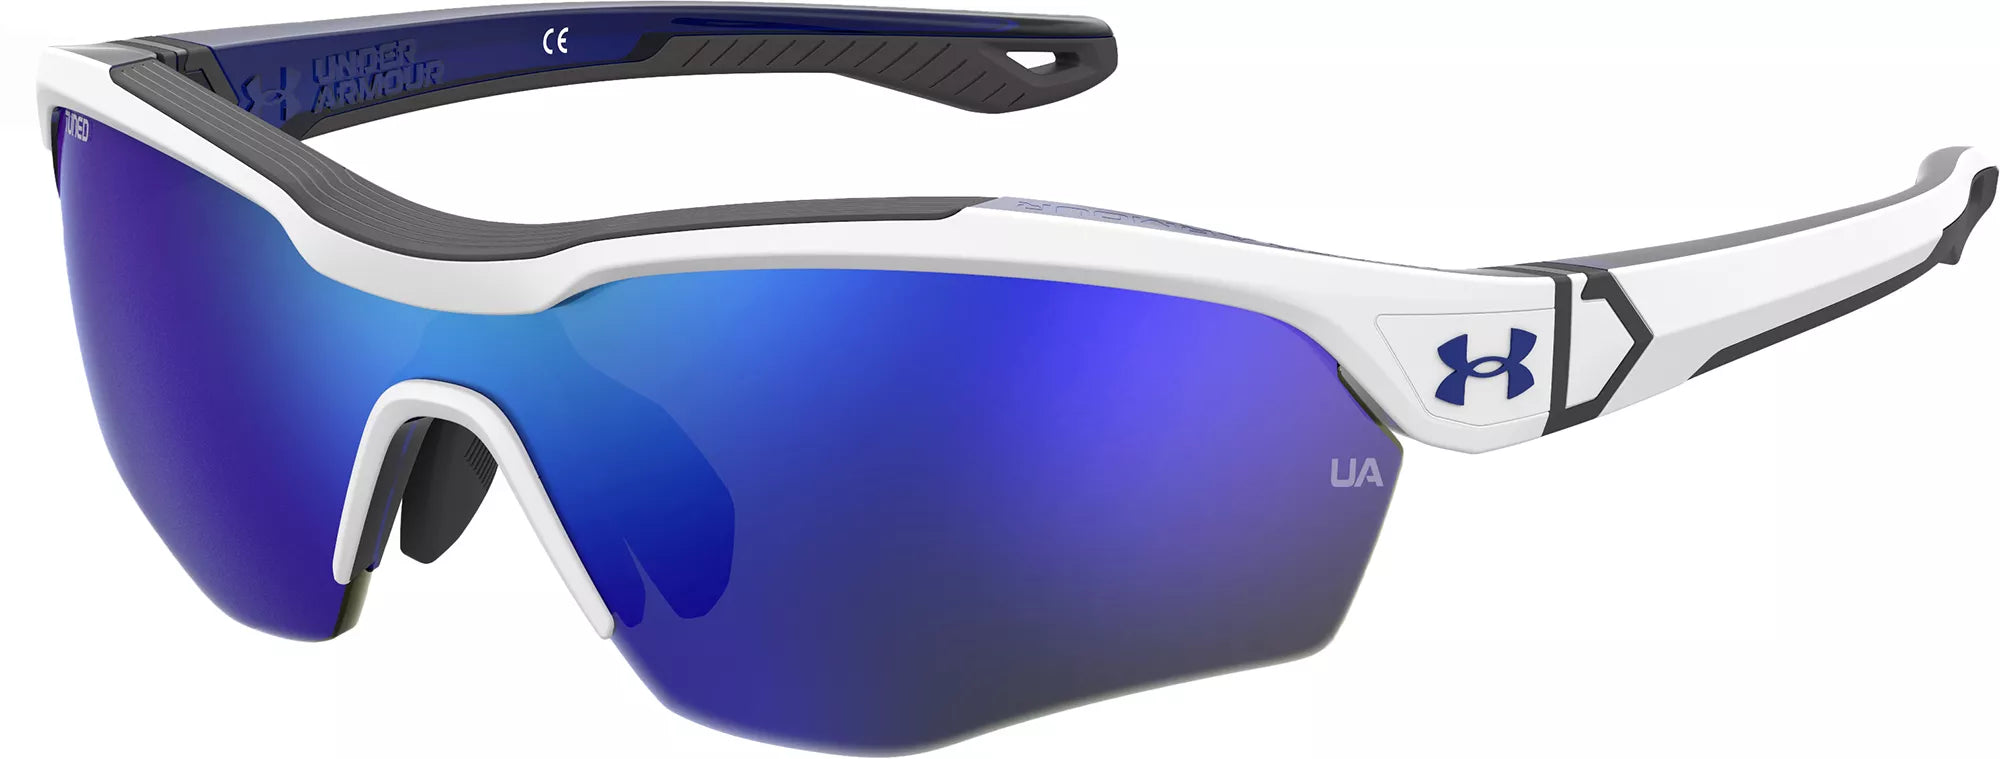 Under Armour Yard Pro Jr. Tuned Baseball Sunglasses Accessories Under Armour White/Transparent Royal/ Jet Grey/Baseball Tuned Blue Mirror  